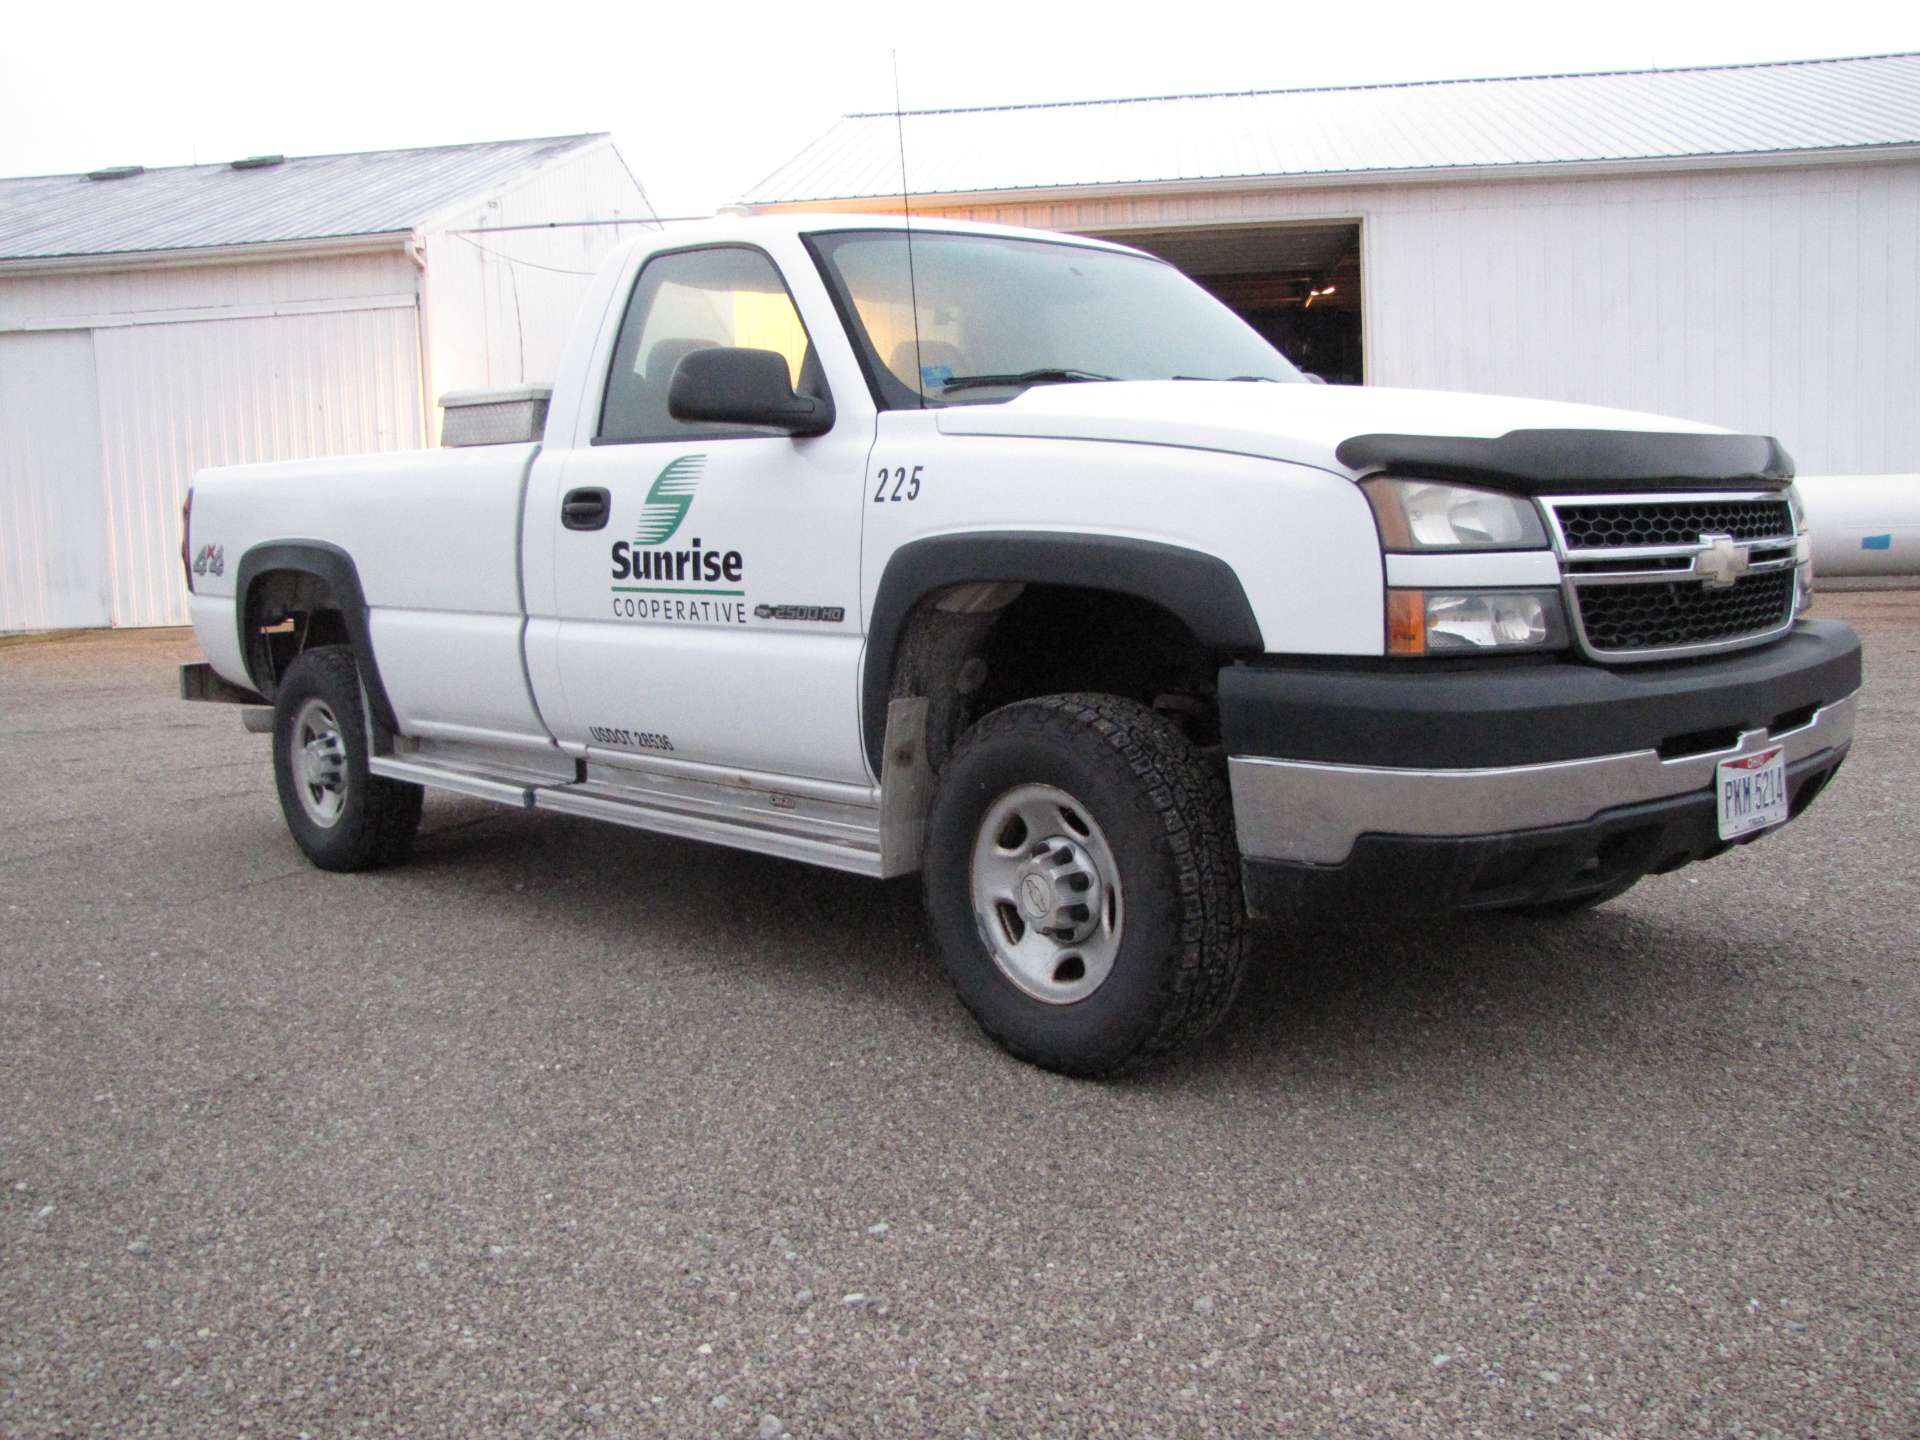 2006 Chevy 2500 HD pickup truck - Image 13 of 65